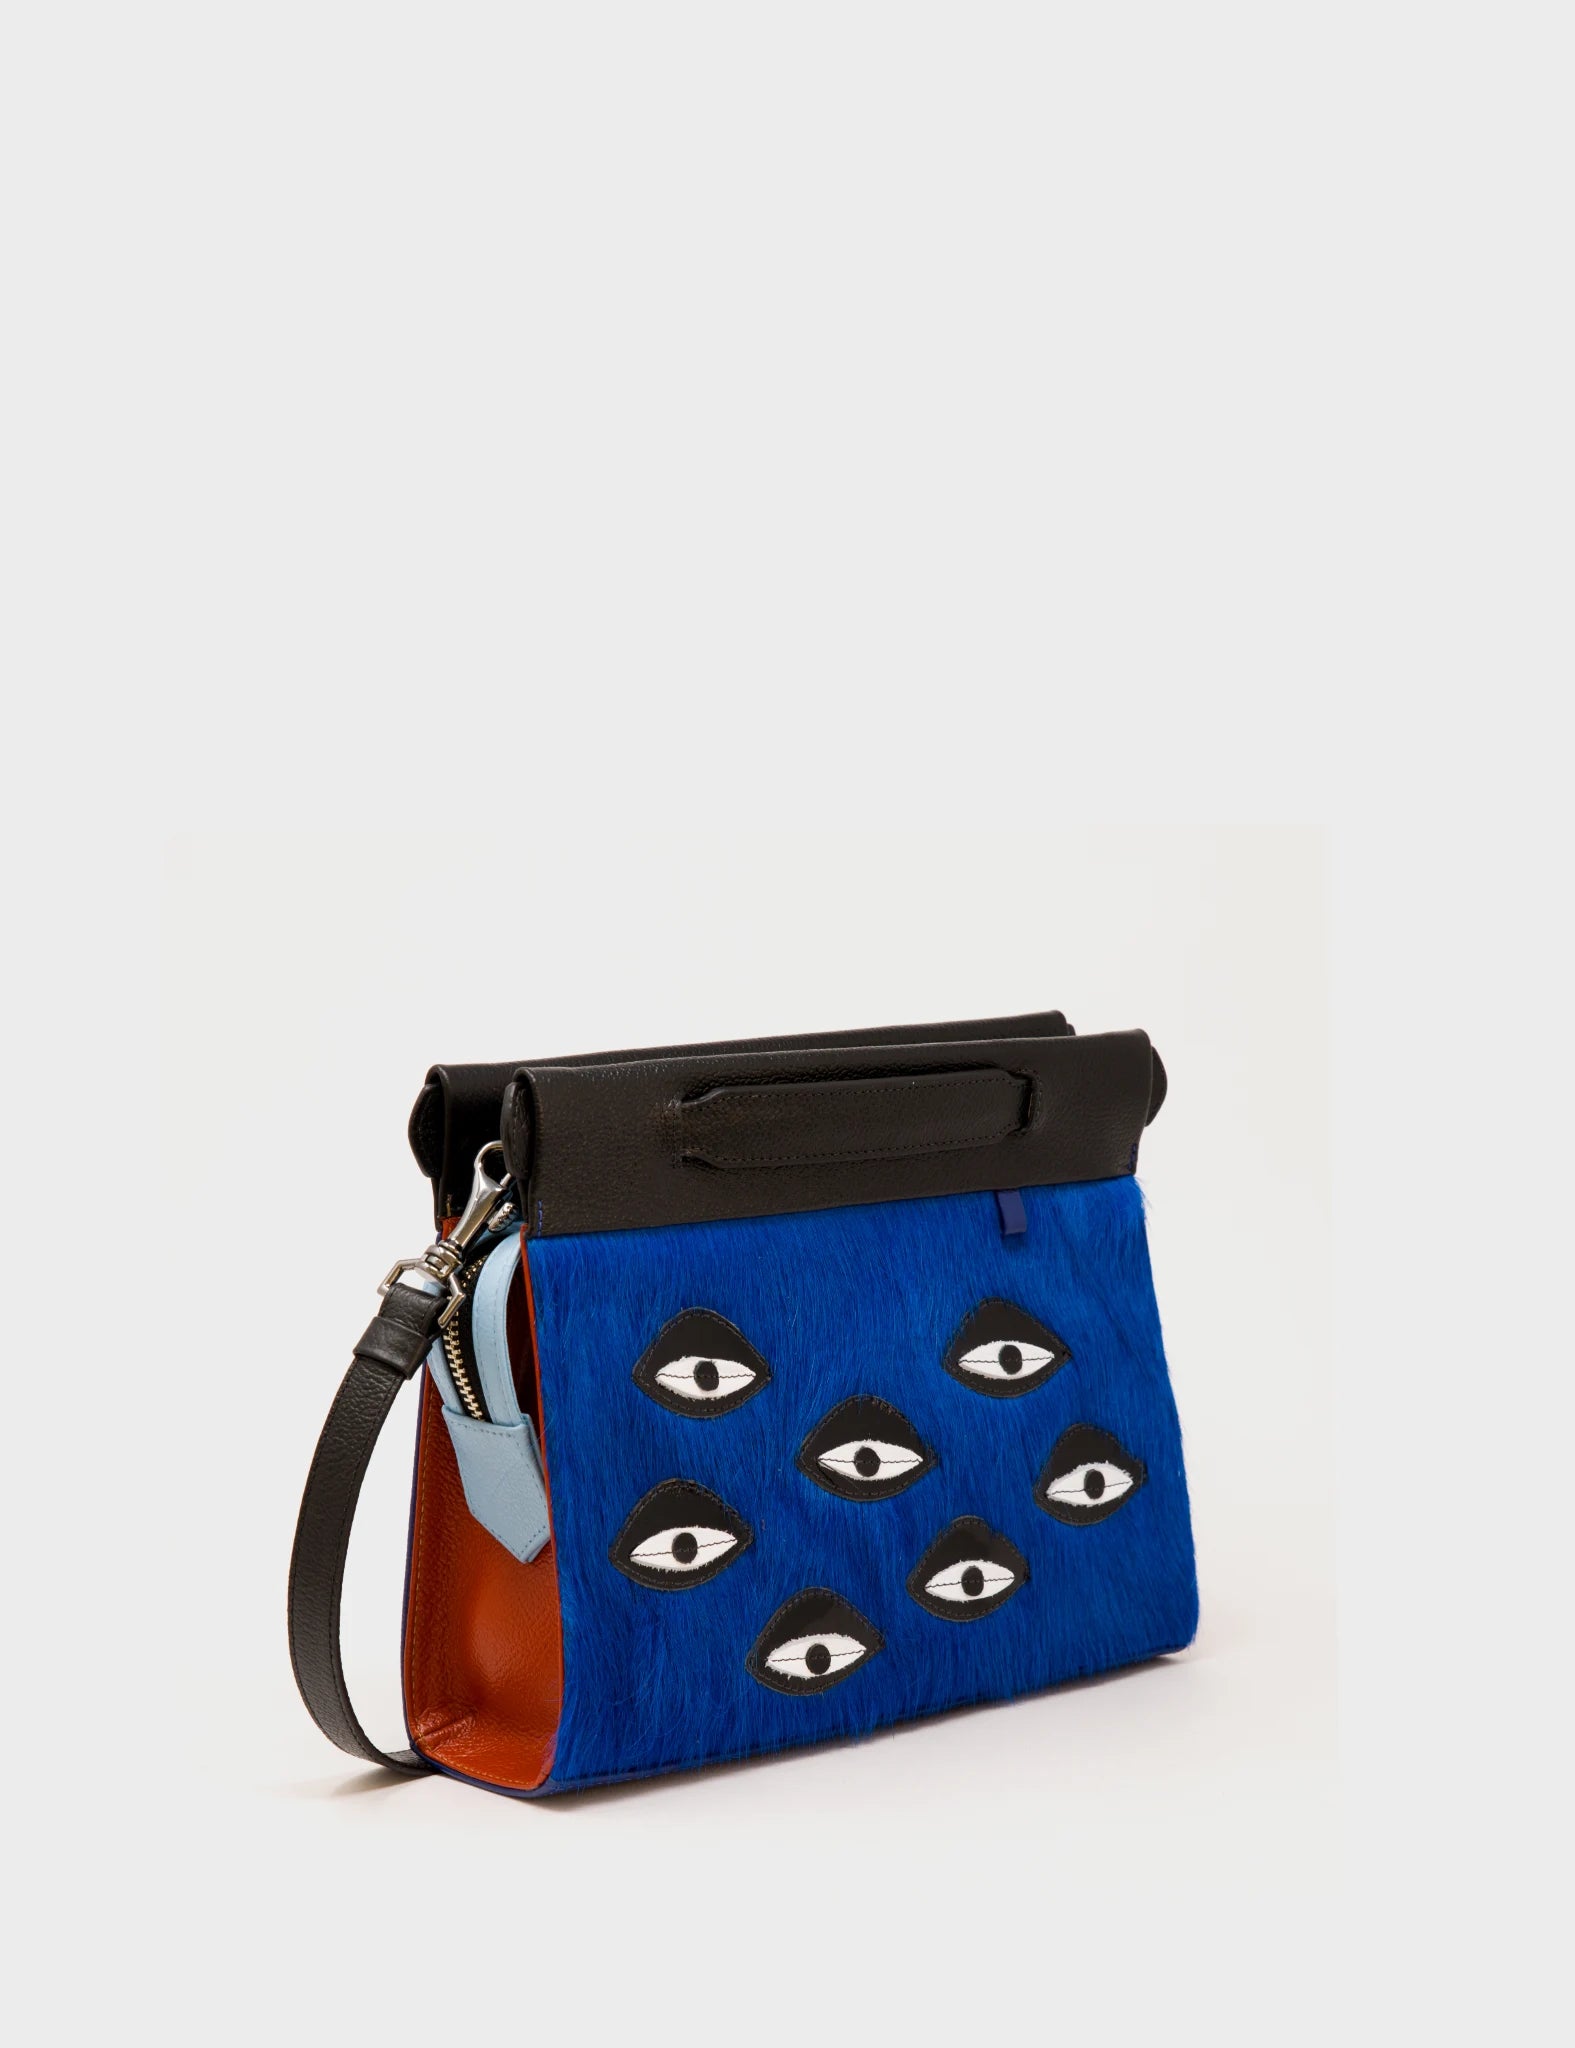 Crossbody Small Royal Blue And Black Leather Bag - Eyes Applique Adjustable Handle